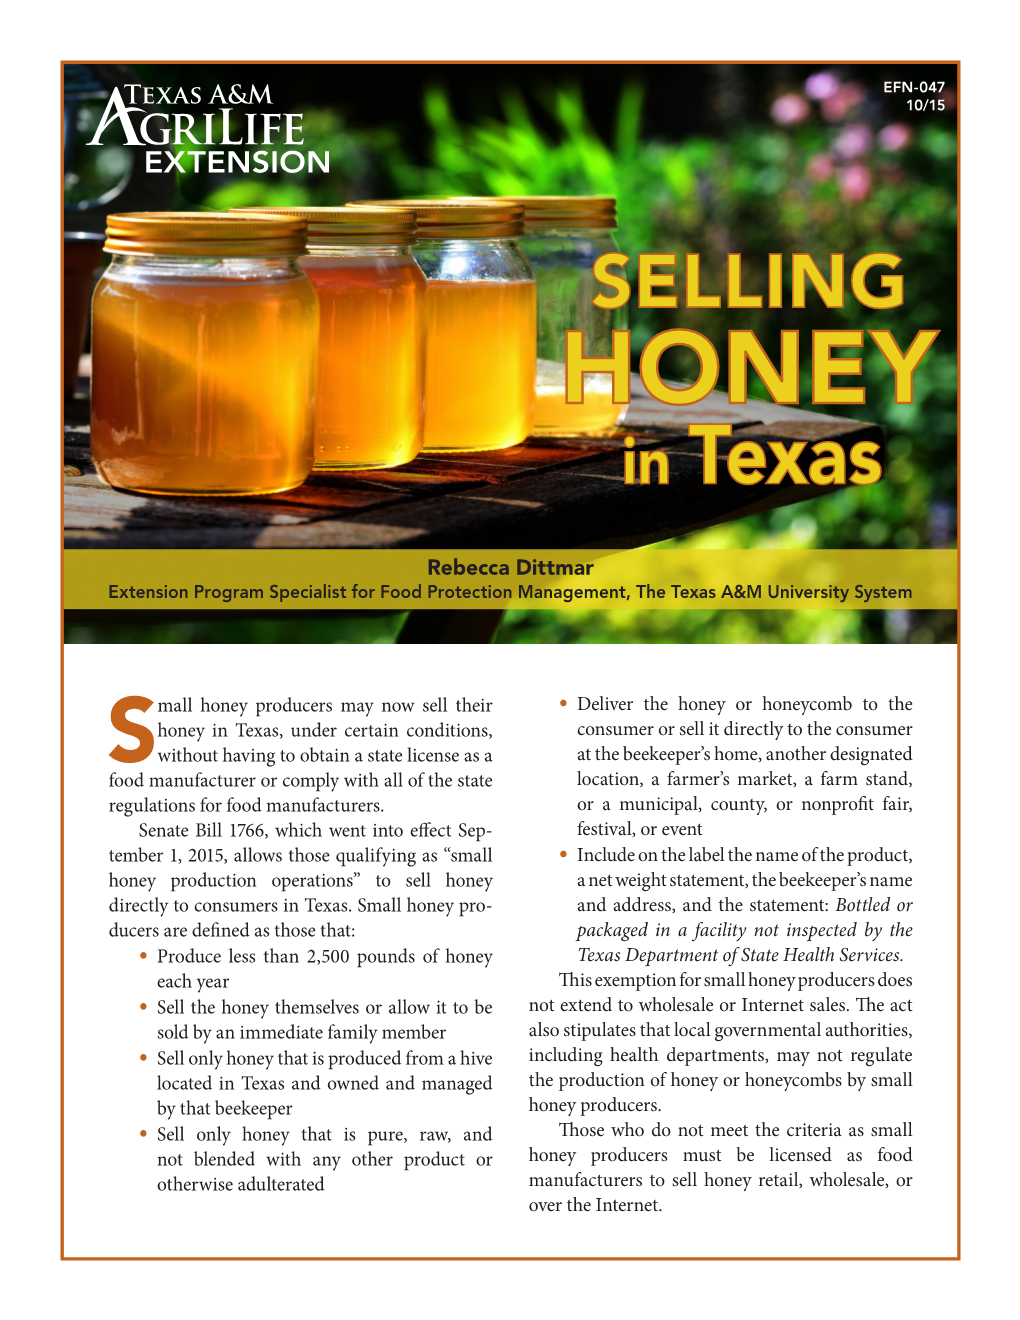 Selling Honey in Texas Frequently Asked Questions